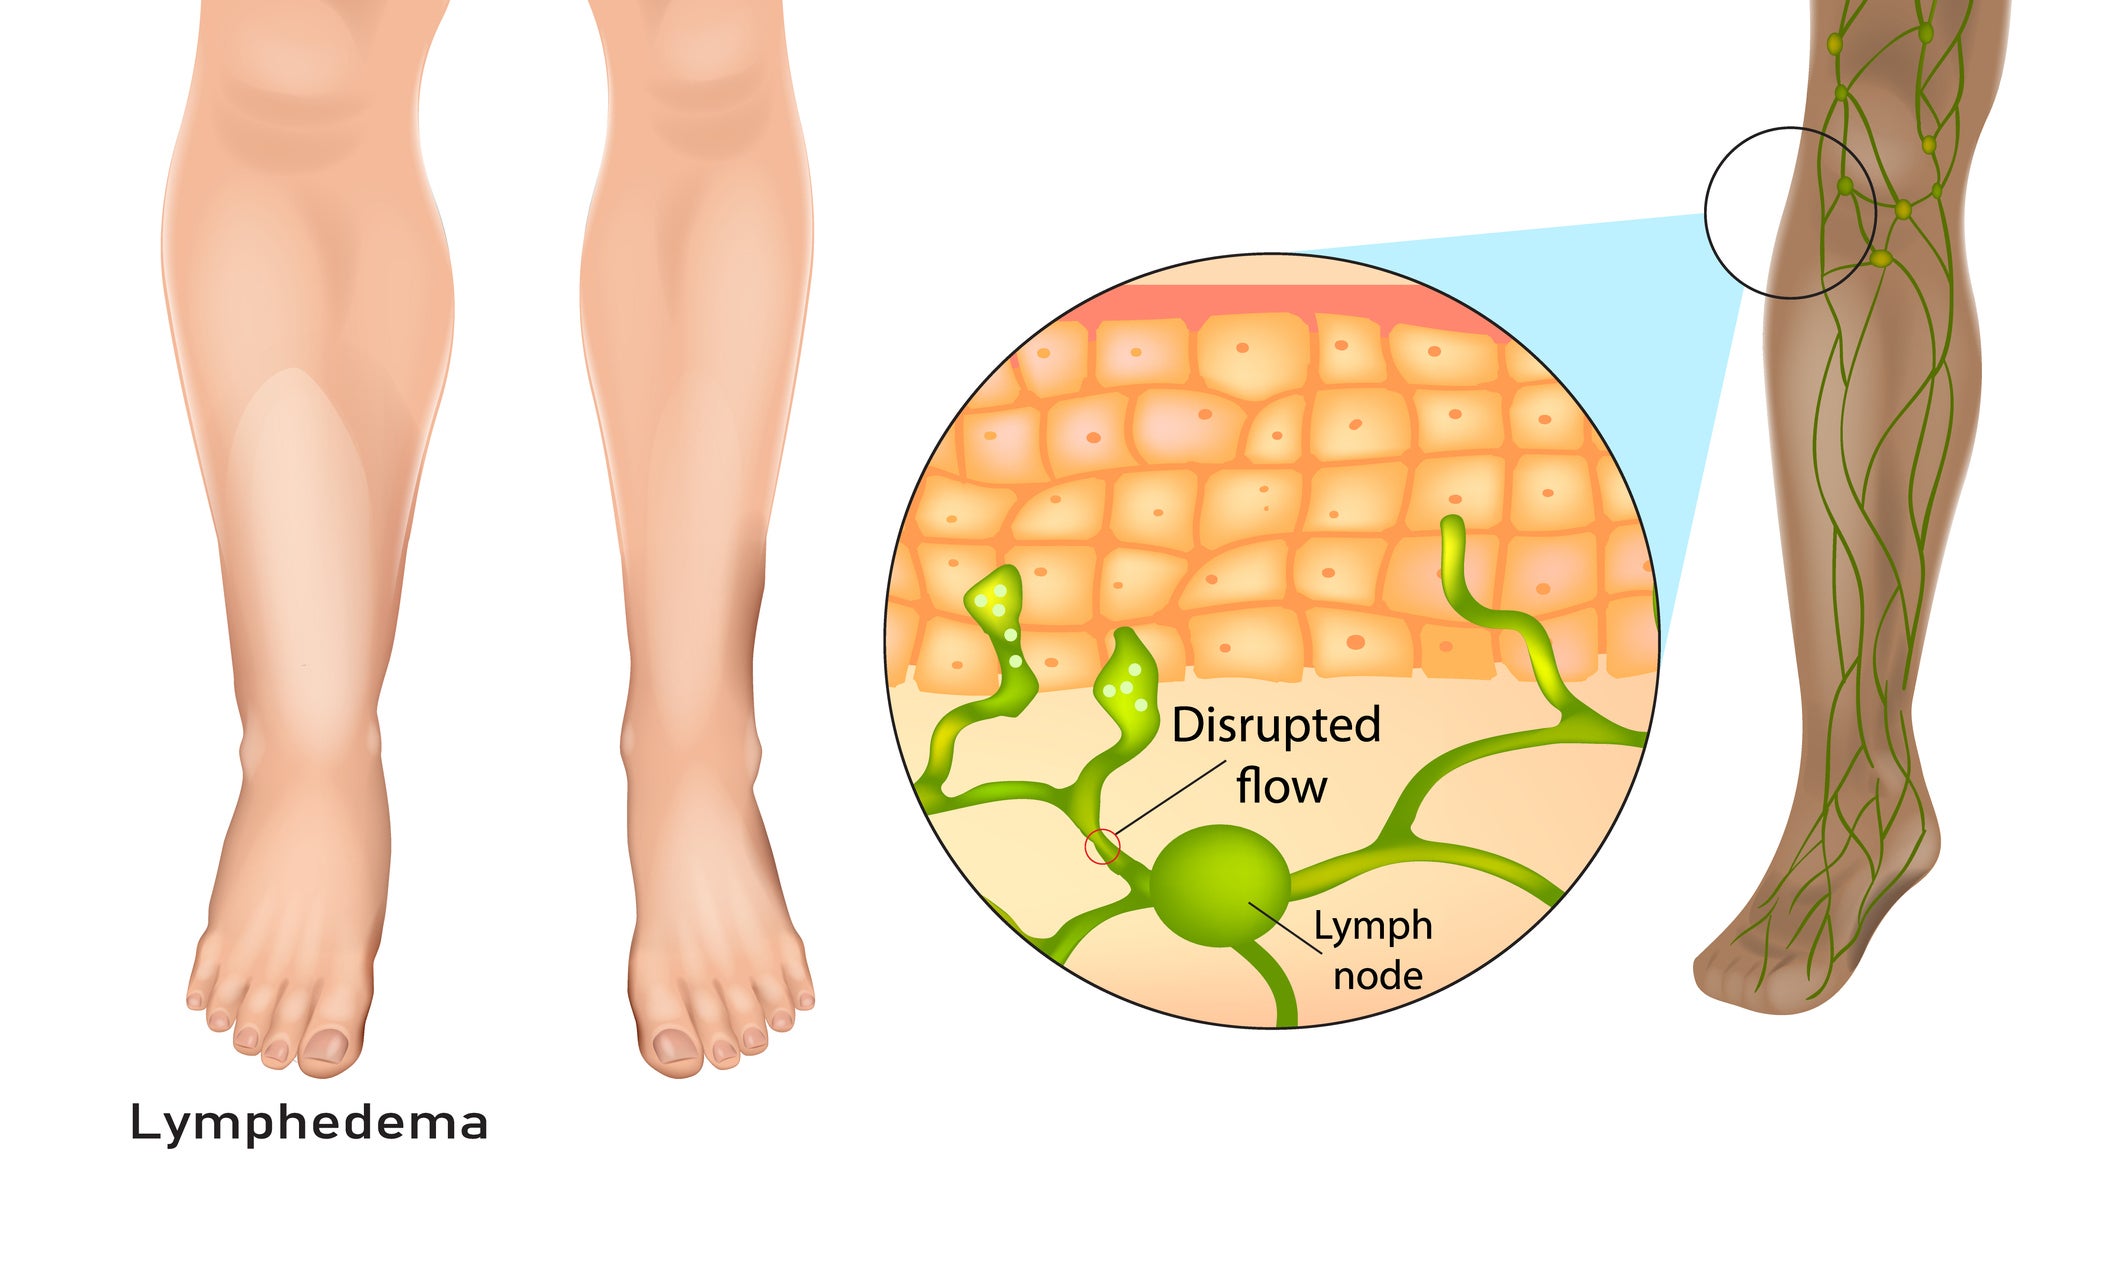 Lymphedema, also known as lymphoedema and lymphatic edema